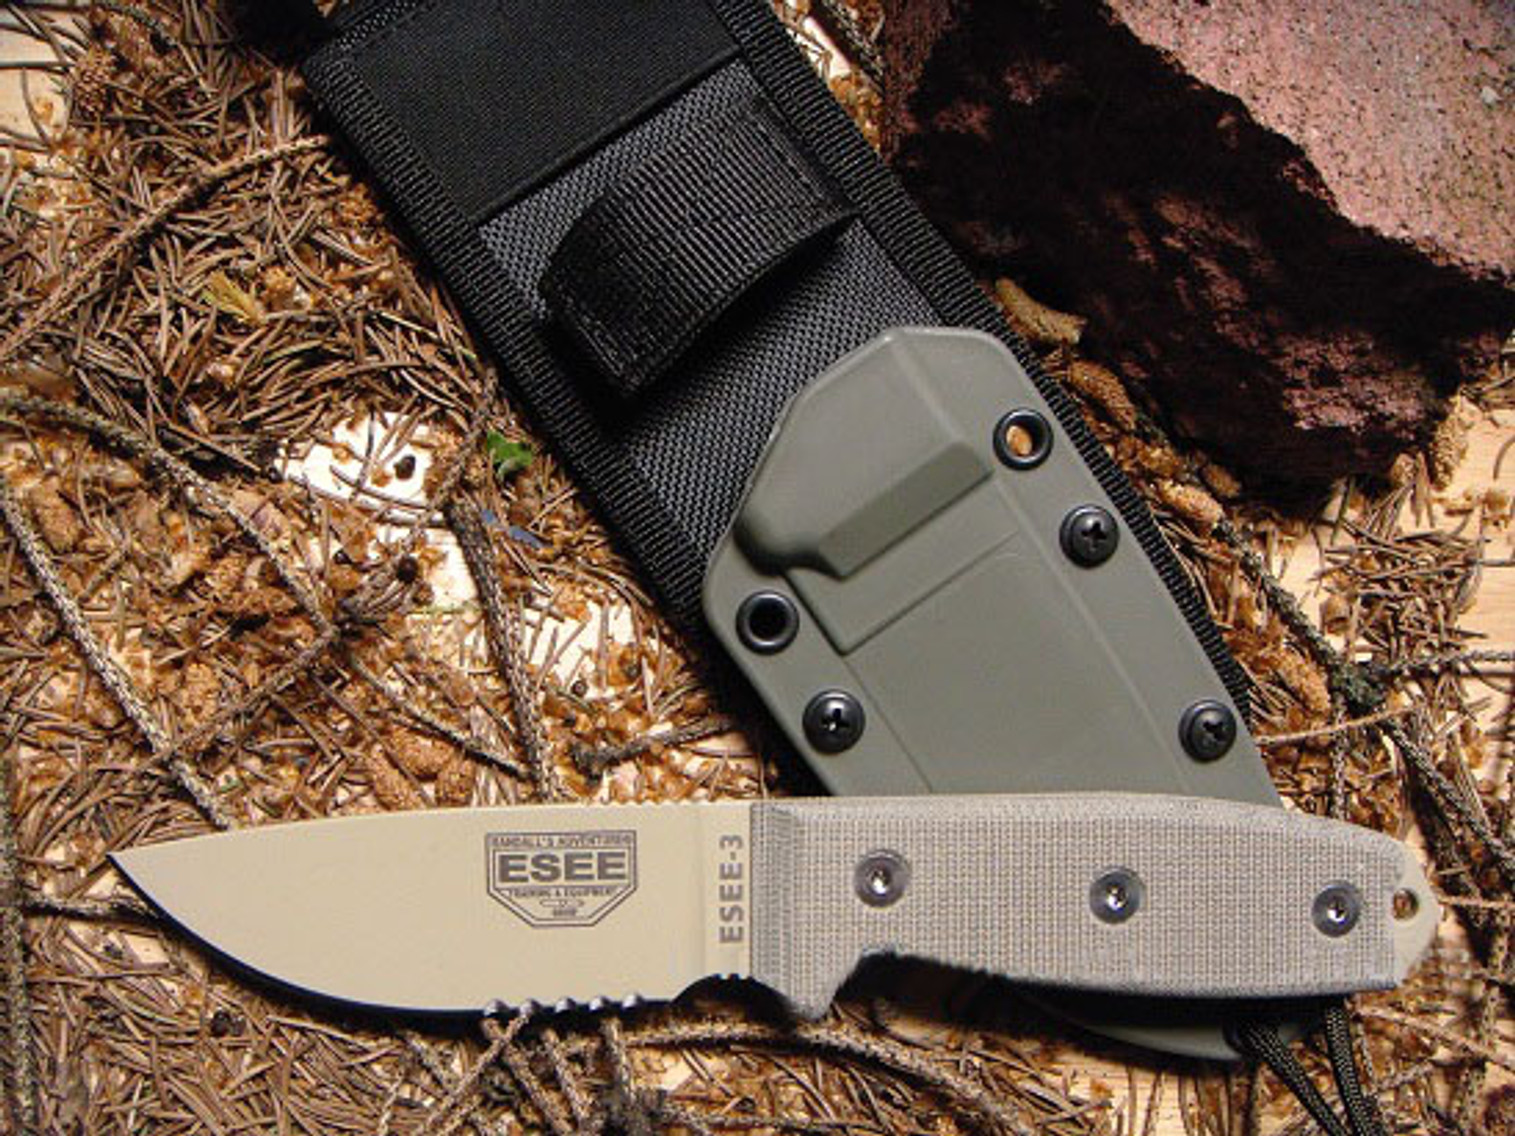 ESEE 3S-MB-DT Desert Tan Blade with Serration